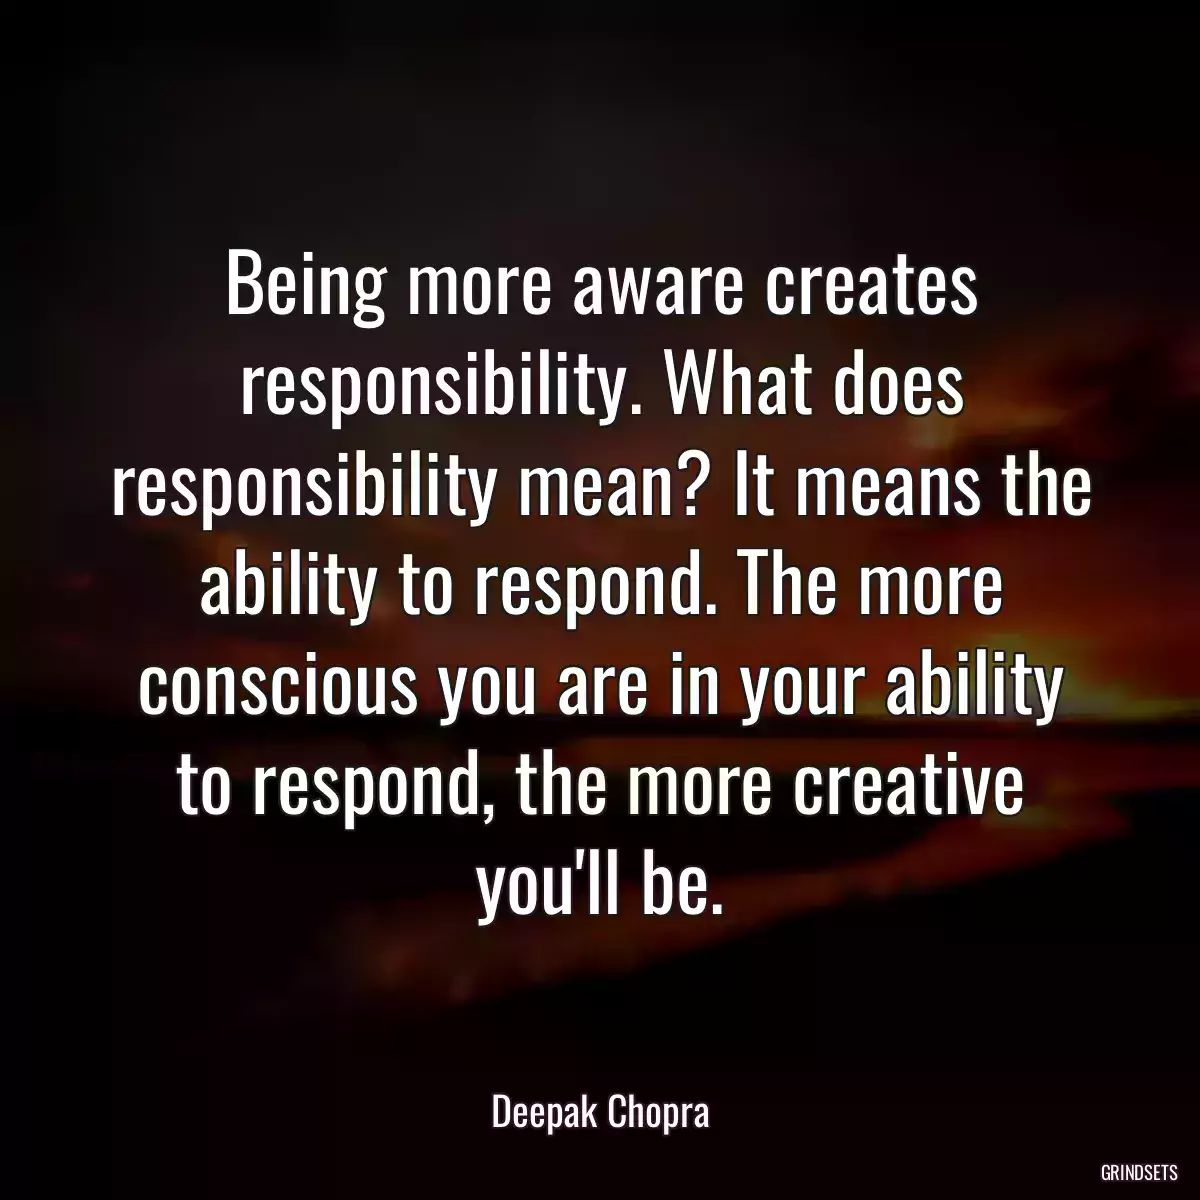 Being more aware creates responsibility. What does responsibility mean? It means the ability to respond. The more conscious you are in your ability to respond, the more creative you\'ll be.